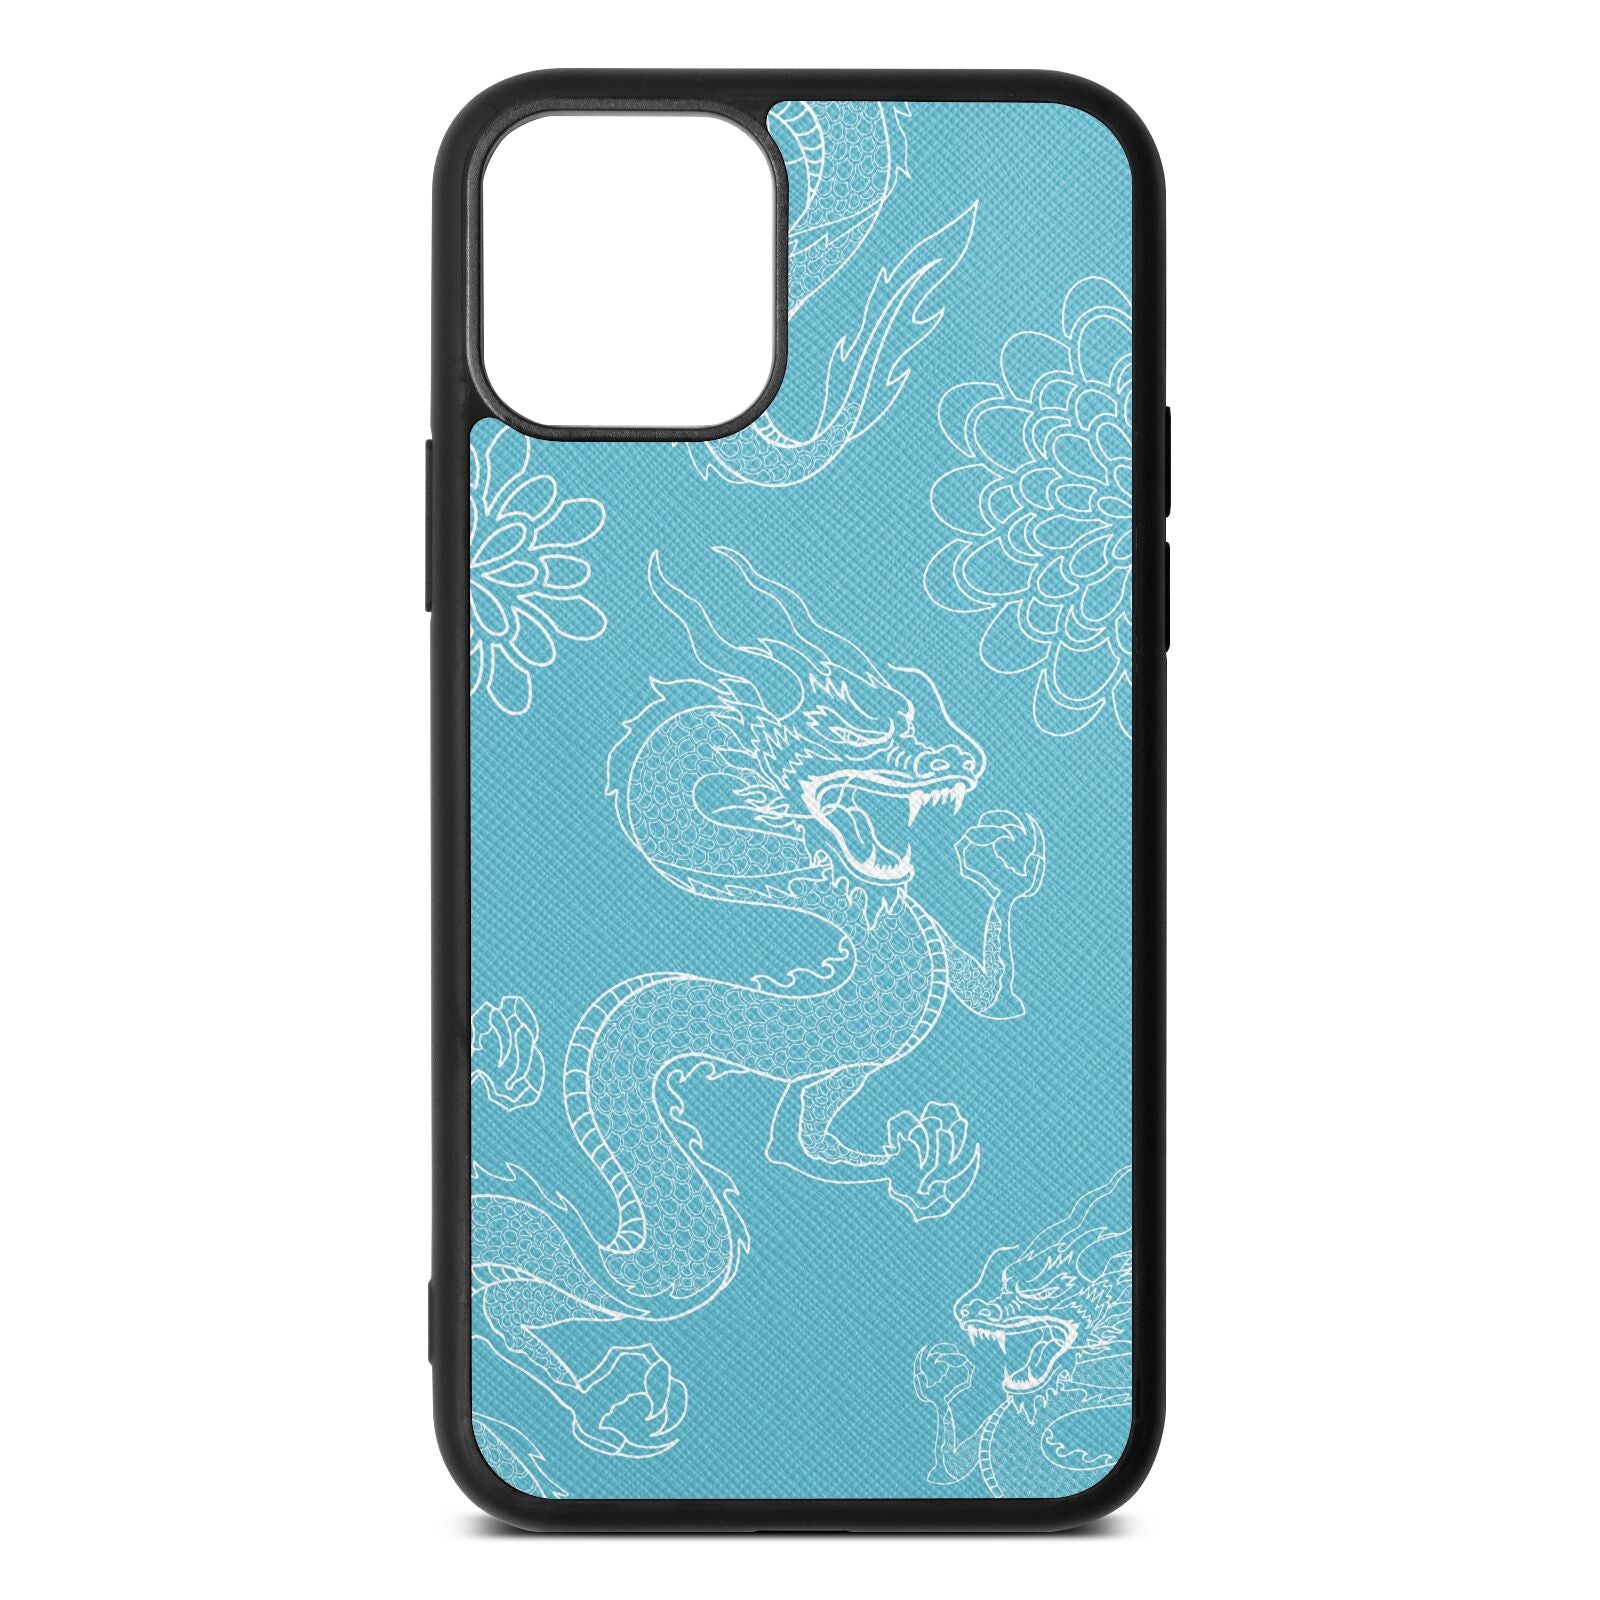 Dragons Sky Saffiano Leather iPhone 11 Pro Case